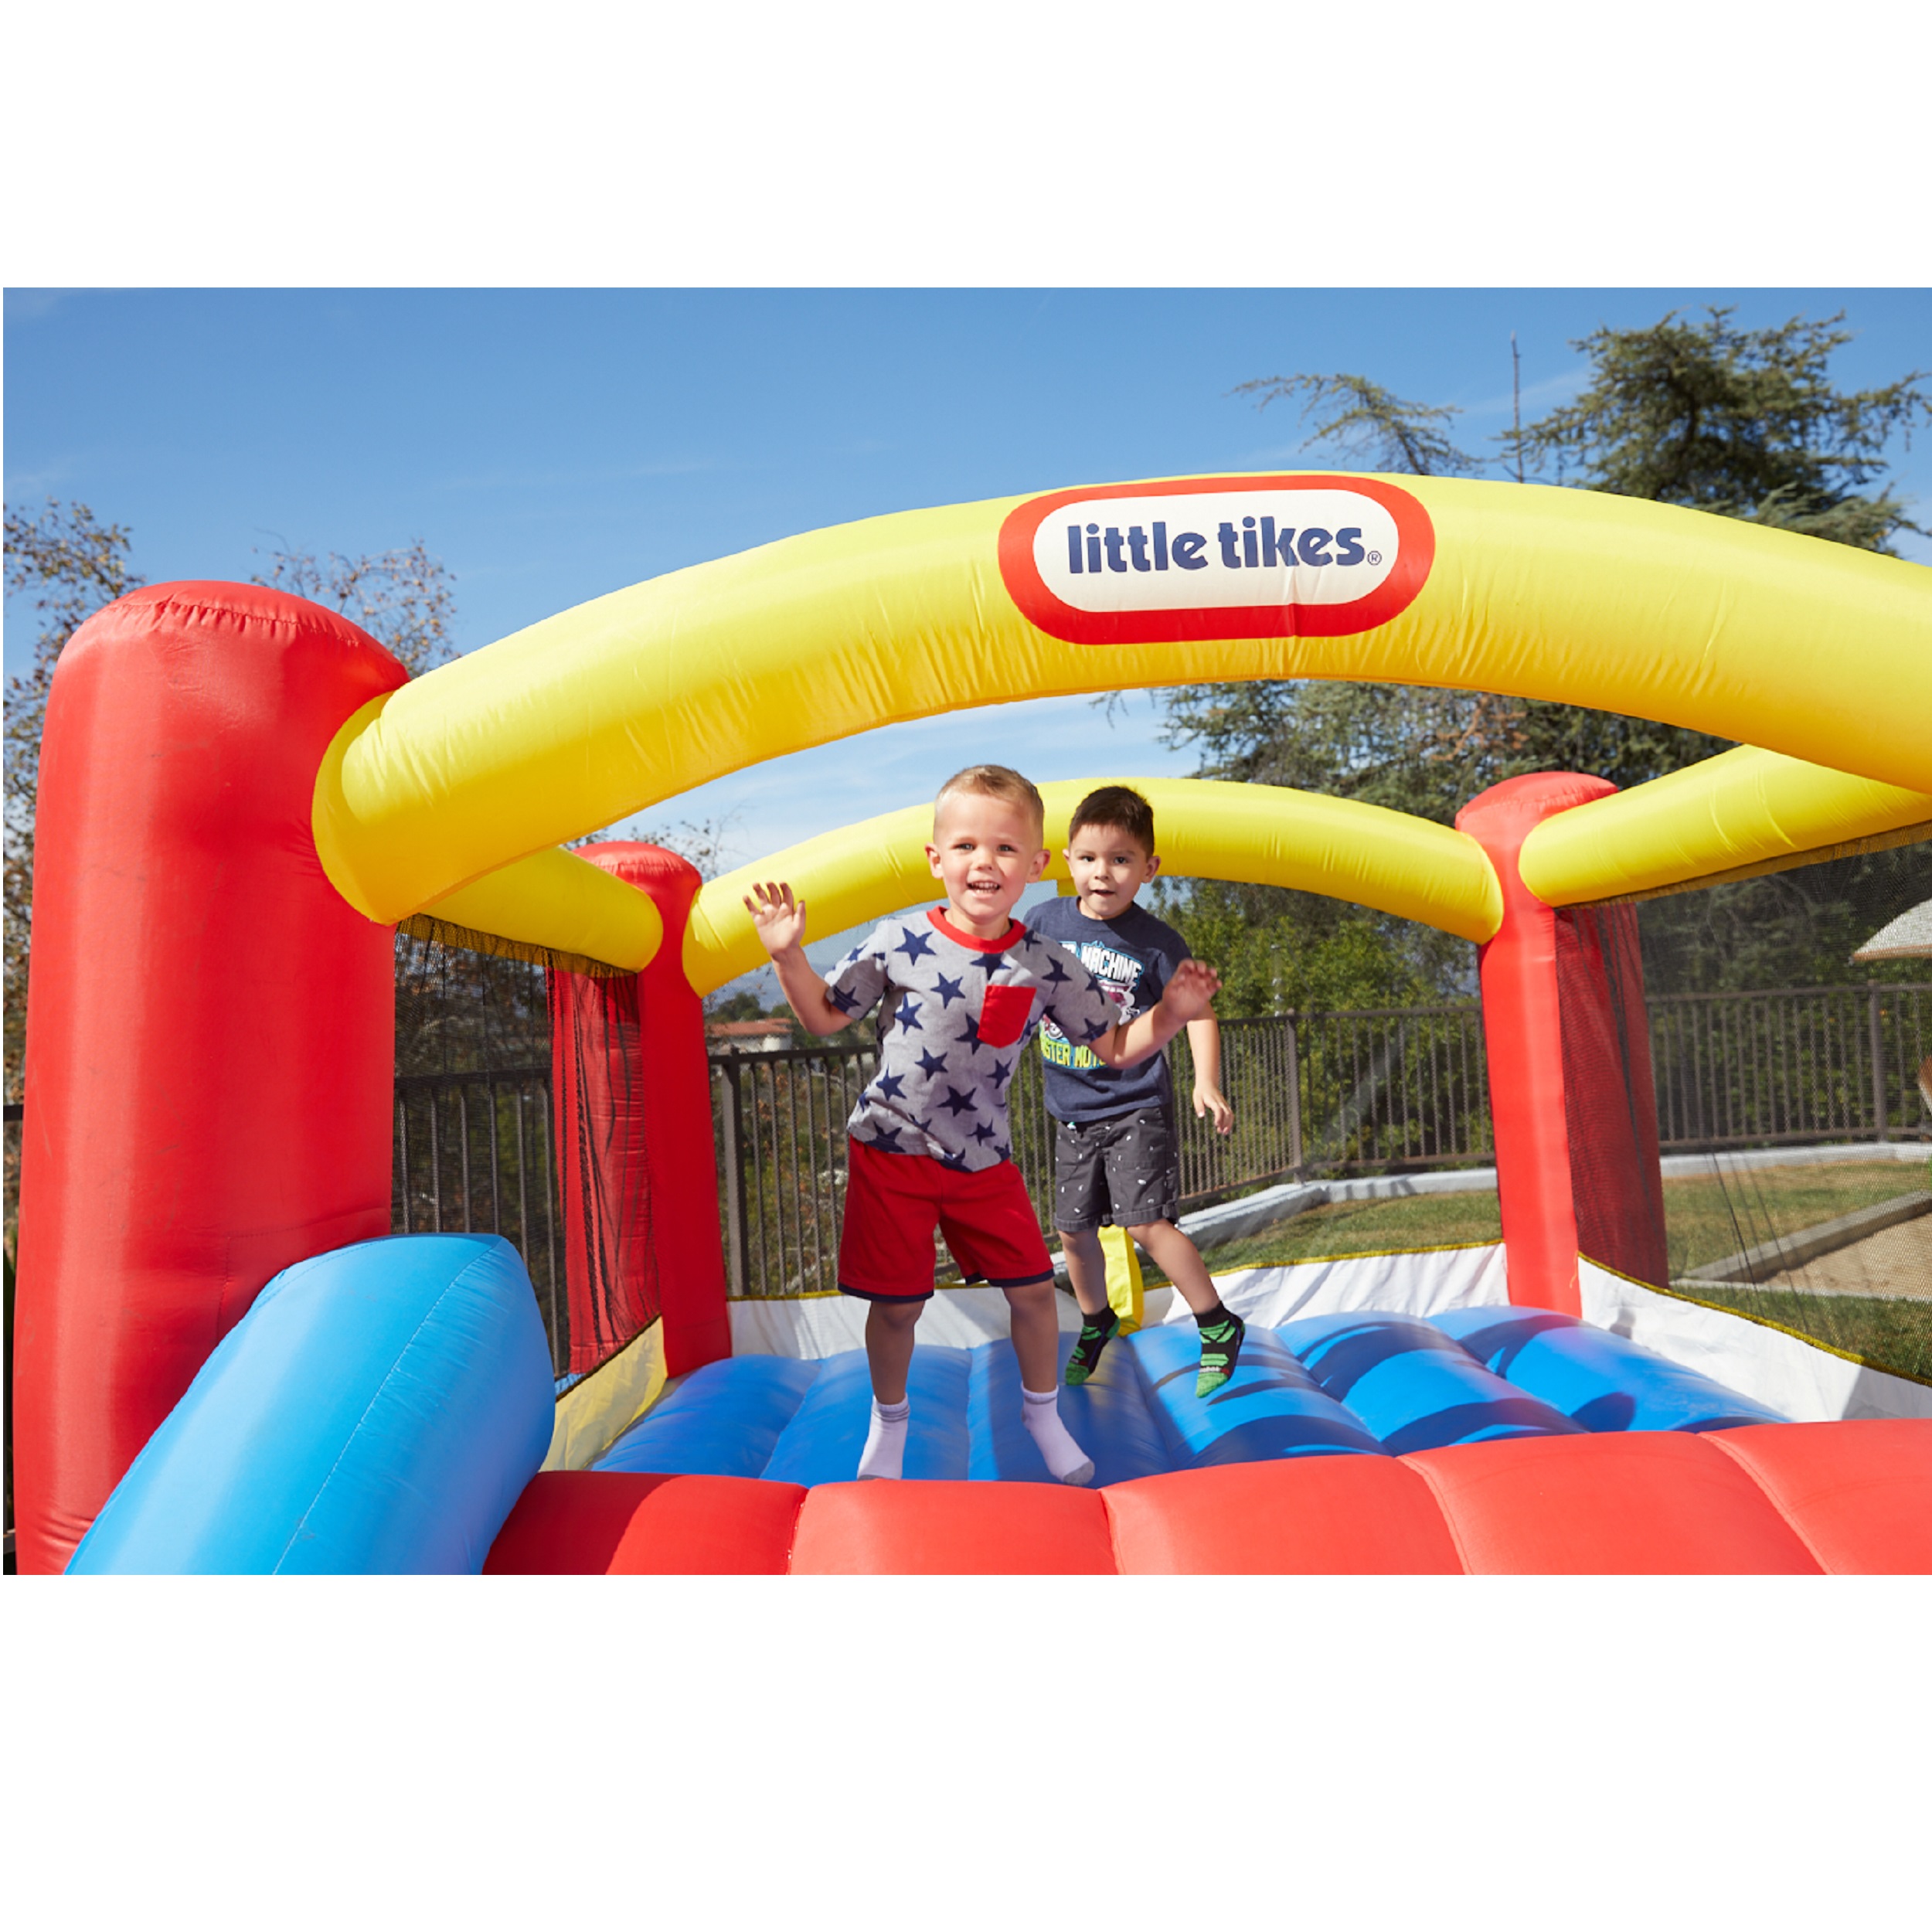 Little Tikes Jump 'n Slide 9'x12' Inflatable Bouncer, Inflatable Bounce House with Slide and Blower, Multicolor- Indoor Outdoor Toy for Kids Girls Boys Ages 3 4 5+ - image 3 of 7